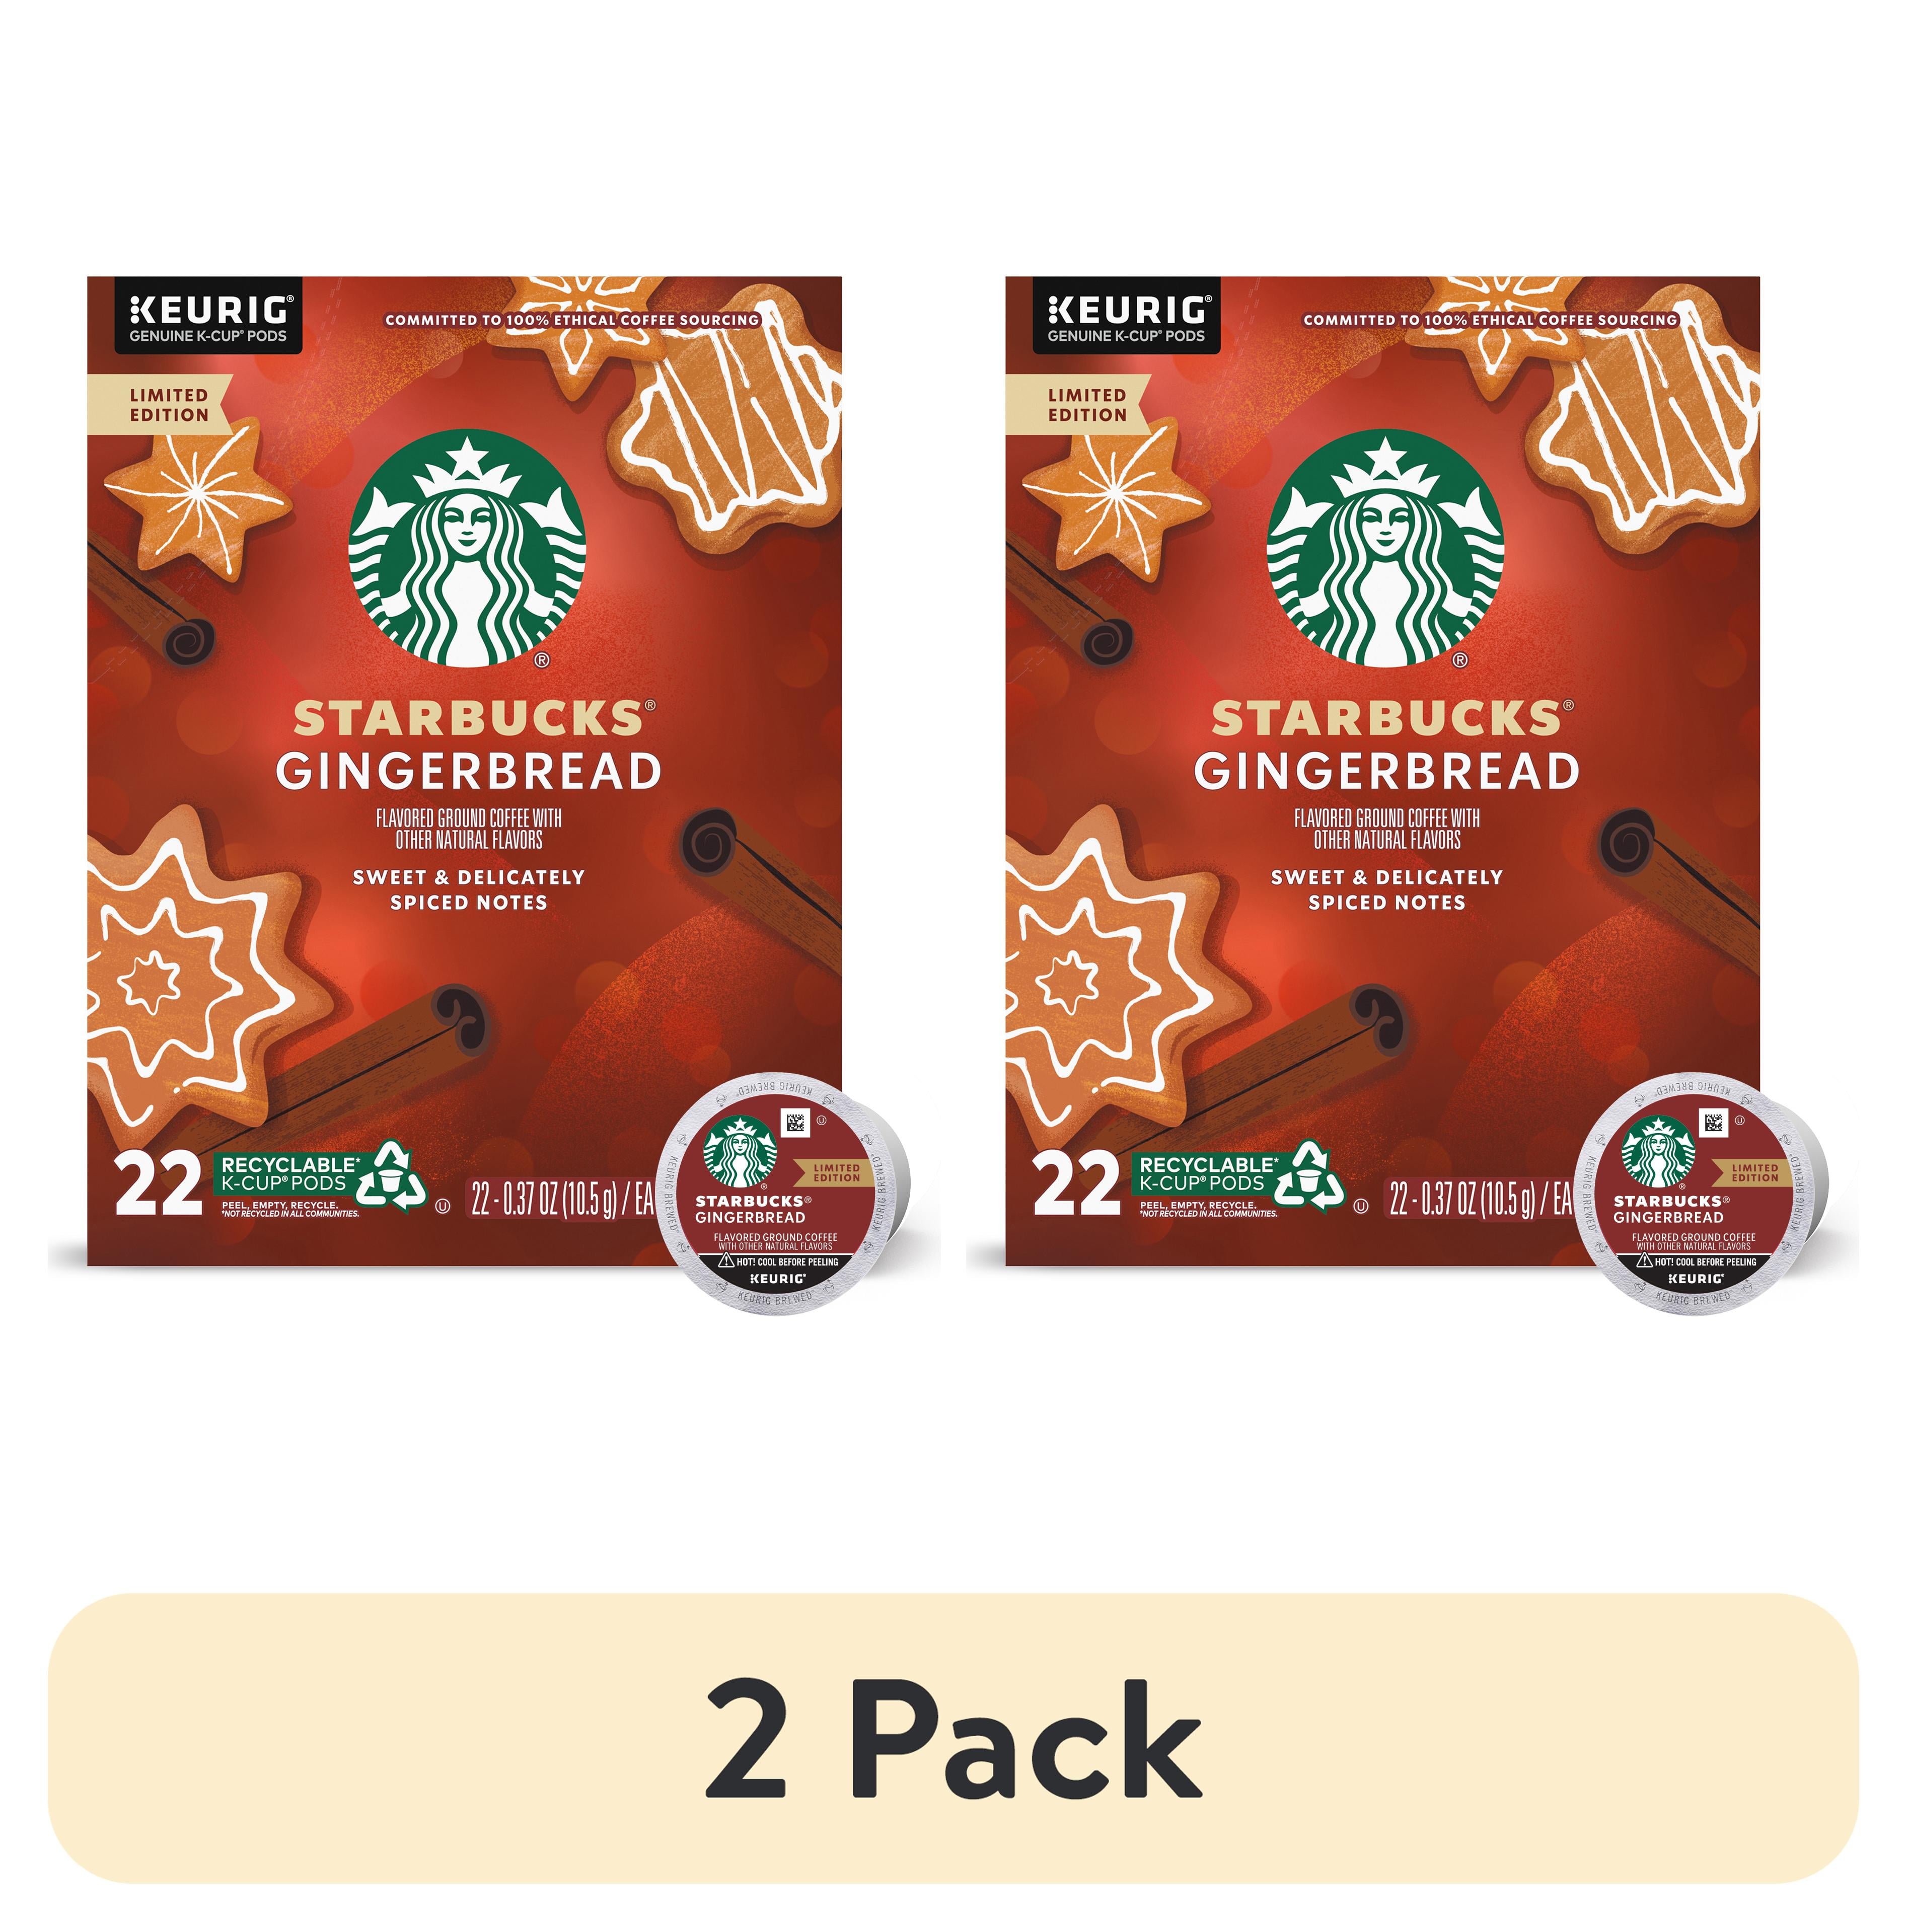 Starbucks K-Cup Coffee Pods, Gingerbread Naturally Flavored Coffee, 100%  Arabica, Naturally Flavored, Limited Edition Holiday Coffee, 1 Bag (17 Oz)